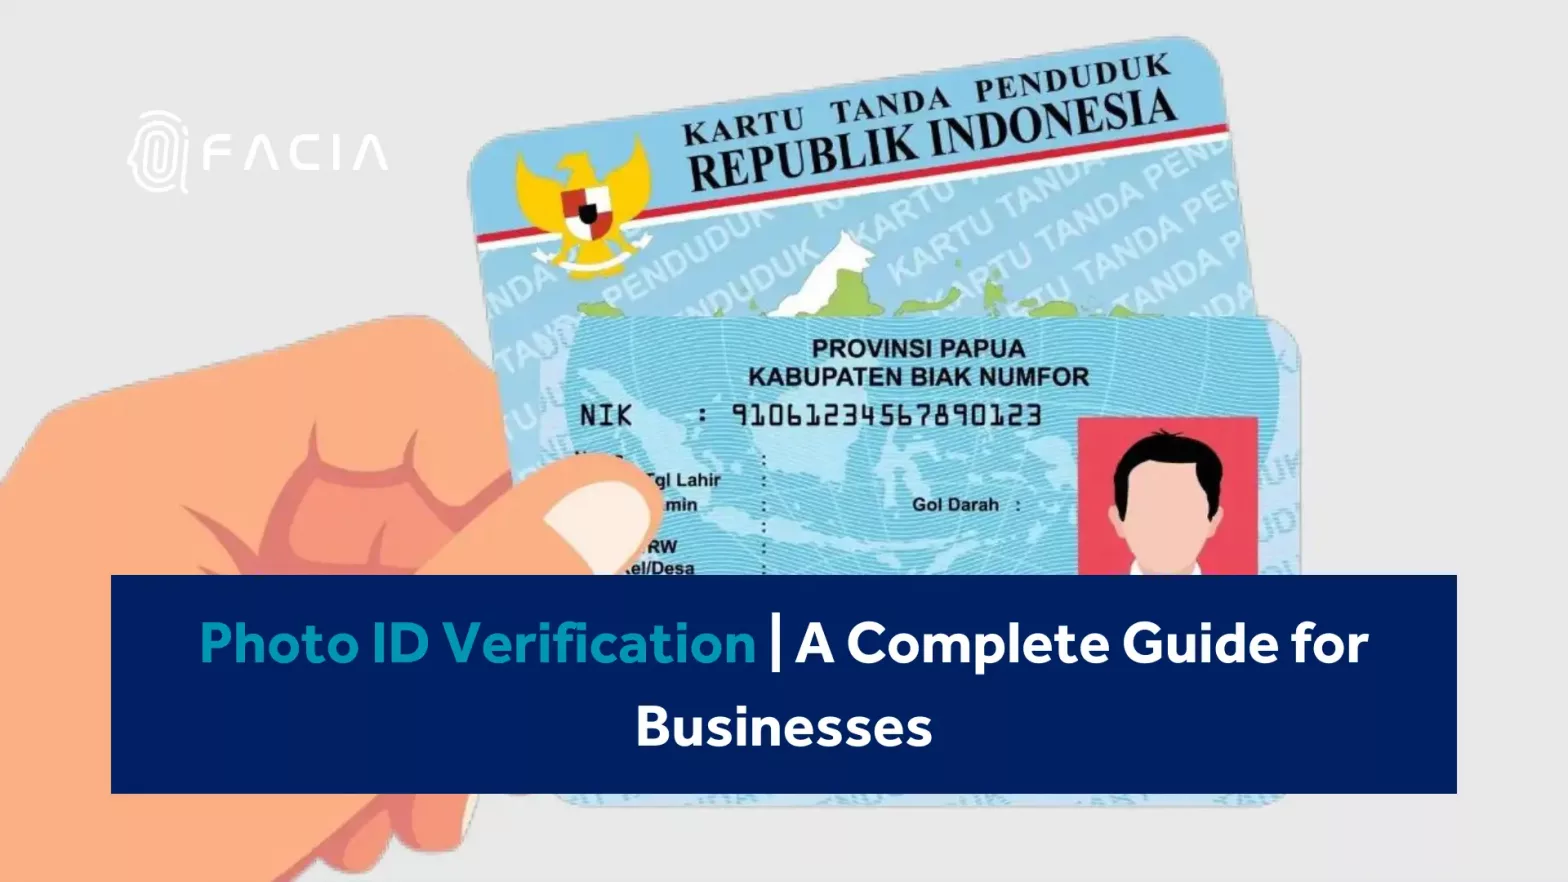 Photo ID Verification A Complete Guide for Businesses